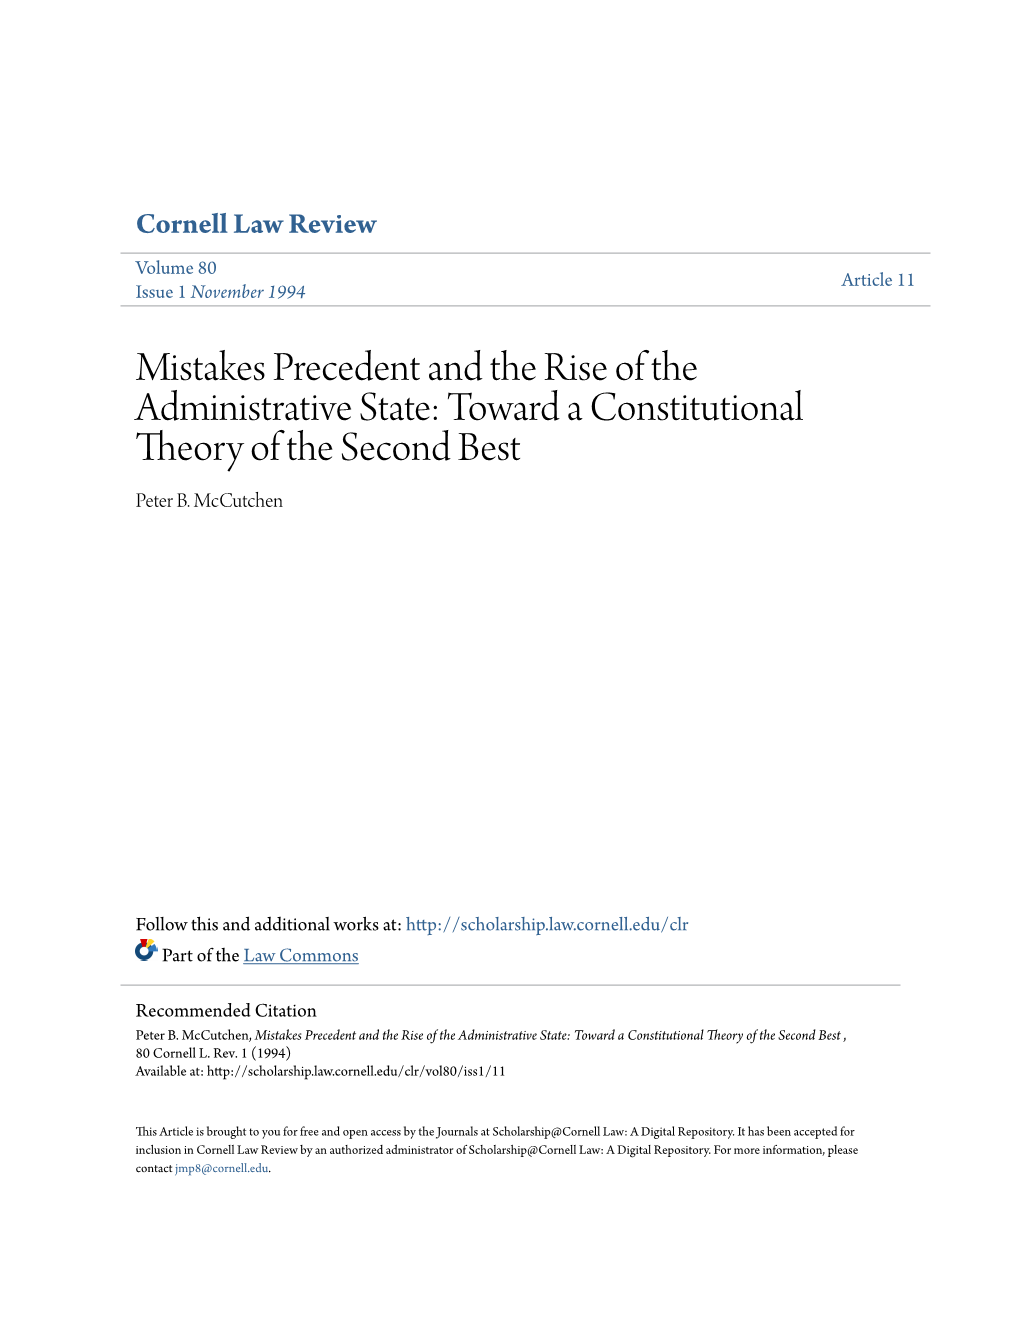 Mistakes Precedent and the Rise of the Administrative State: Toward a Constitutional Theory of the Second Best Peter B